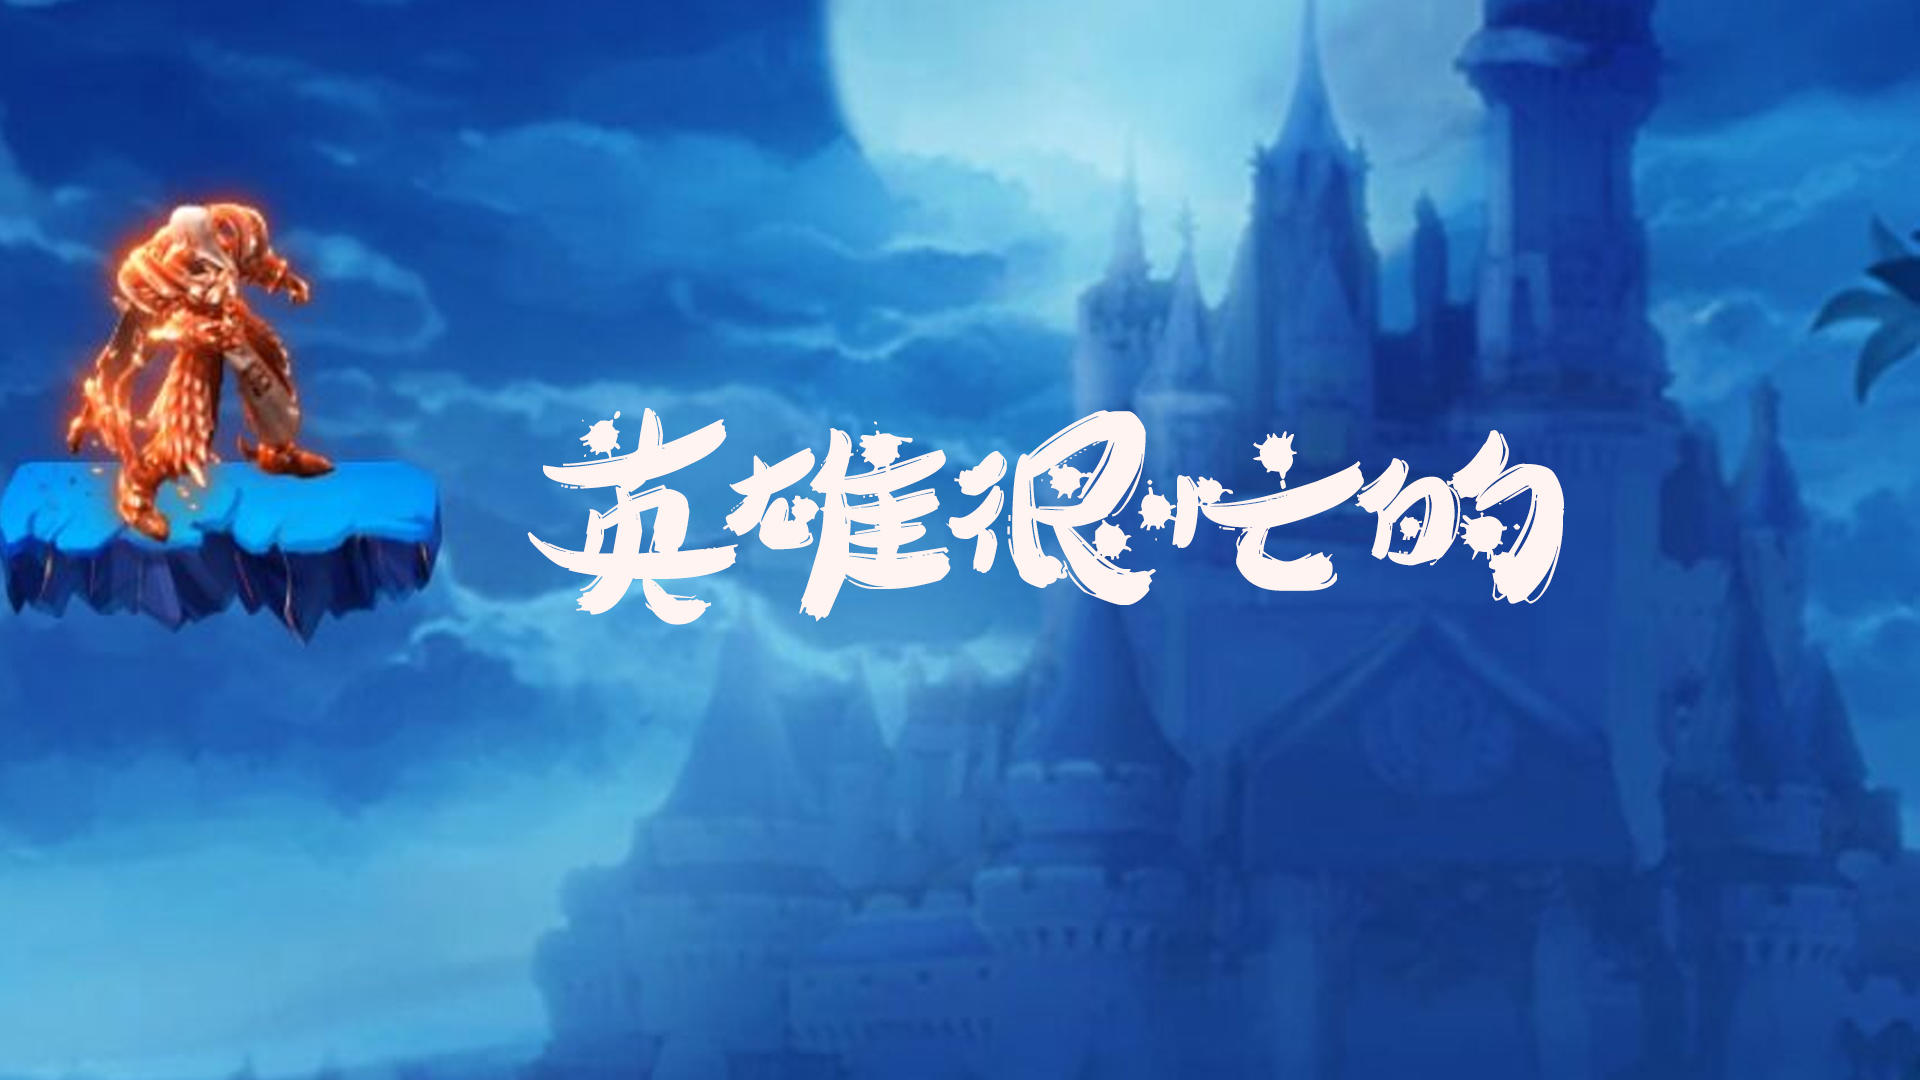 Banner of 英雄很忙的 27